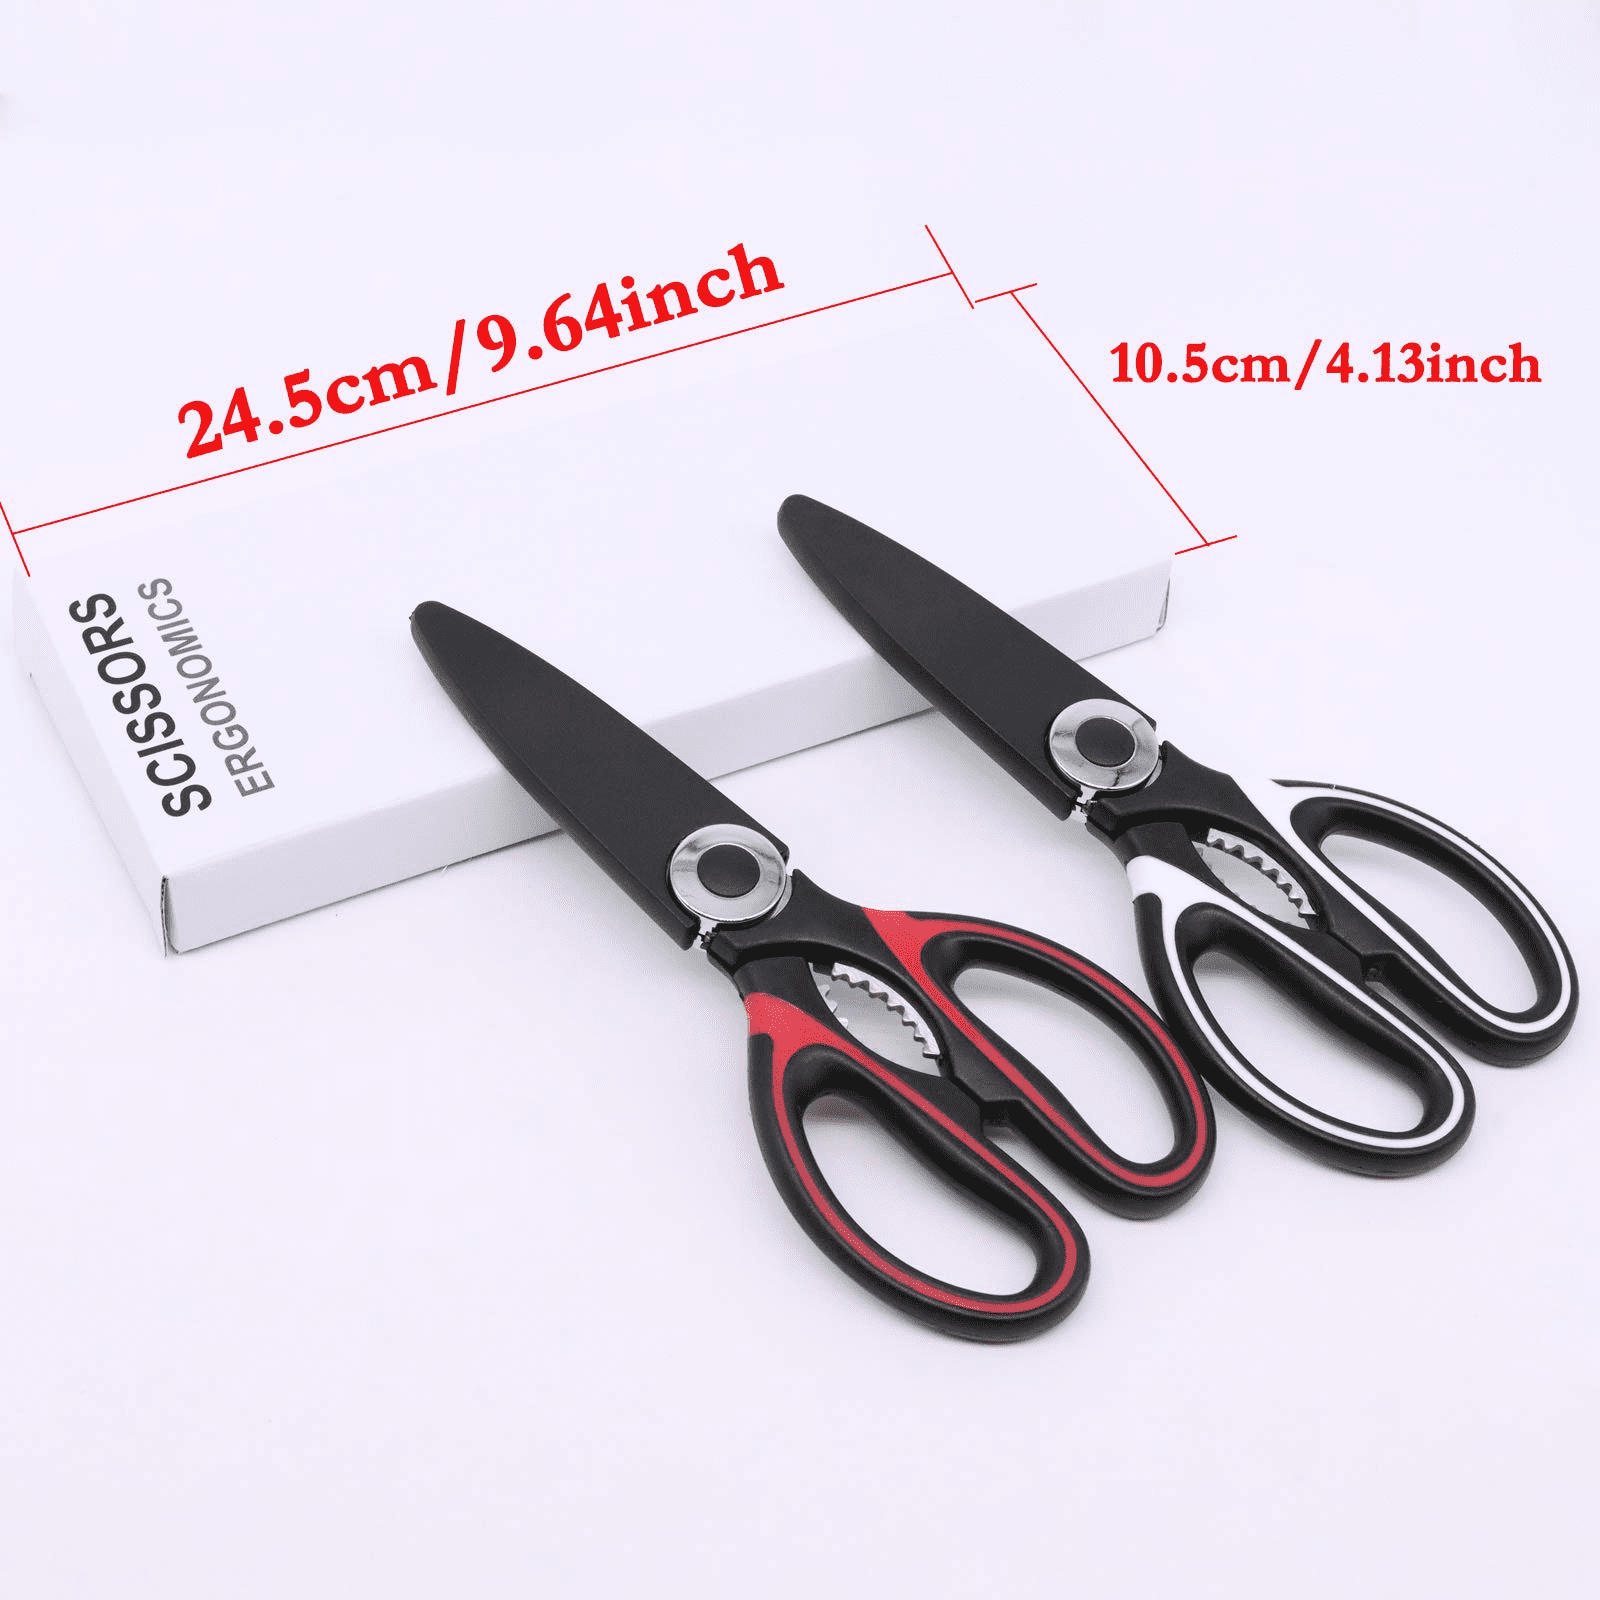 All Purpose Craft Scissors 5 1/2 in By Sookie Sews #SS719